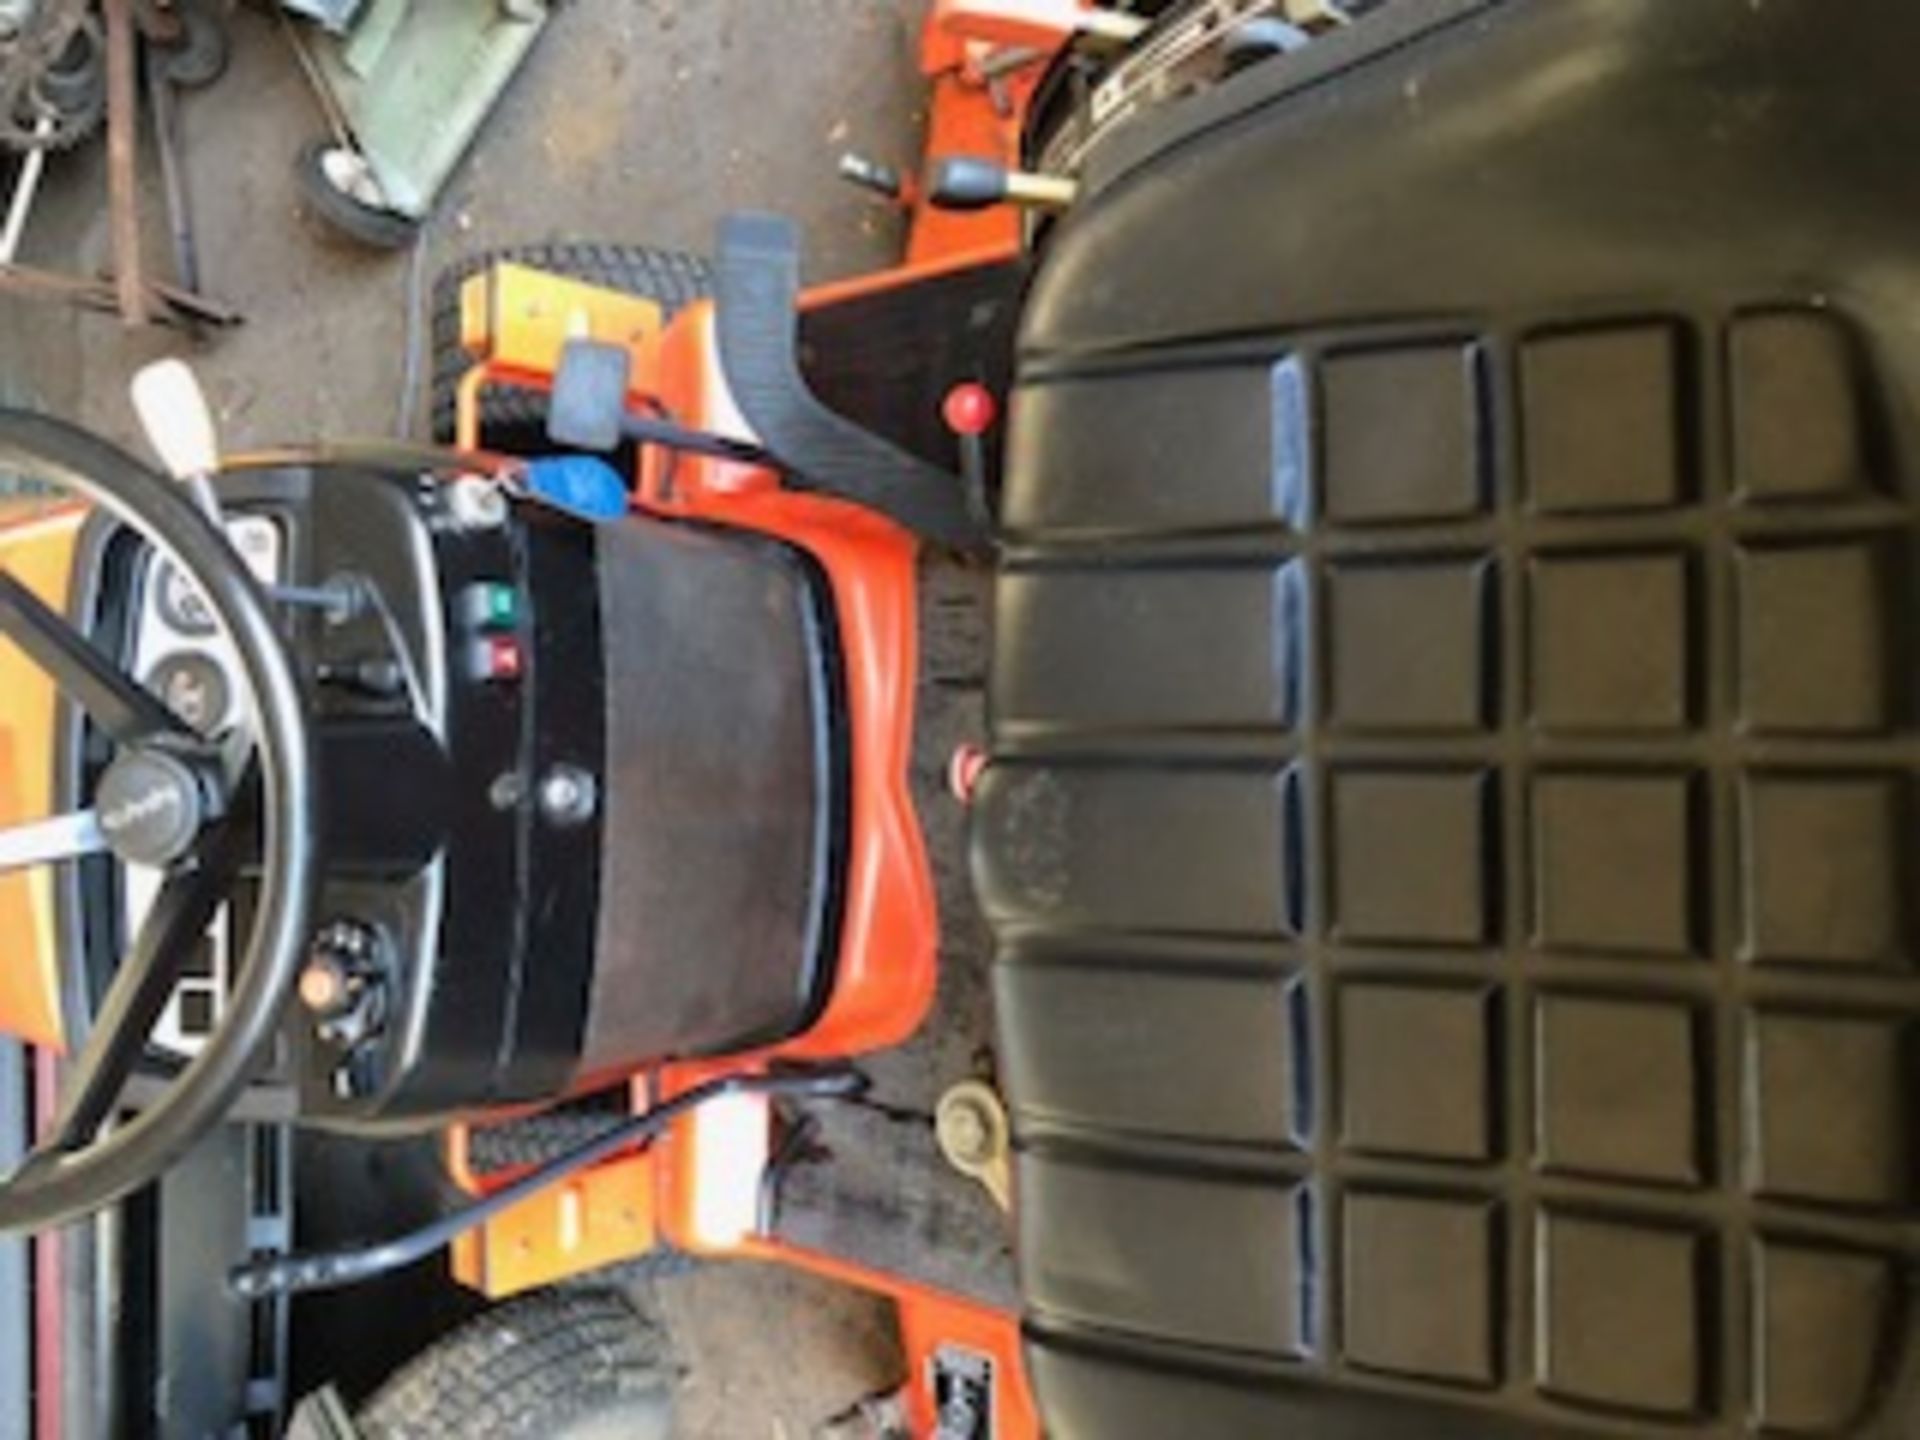 2000 KUBOTA BX COMPACT TRACTOR IN VERY GOOD CONDITION 54" HD CUTTING DECK *PLUS VAT* - Image 7 of 9